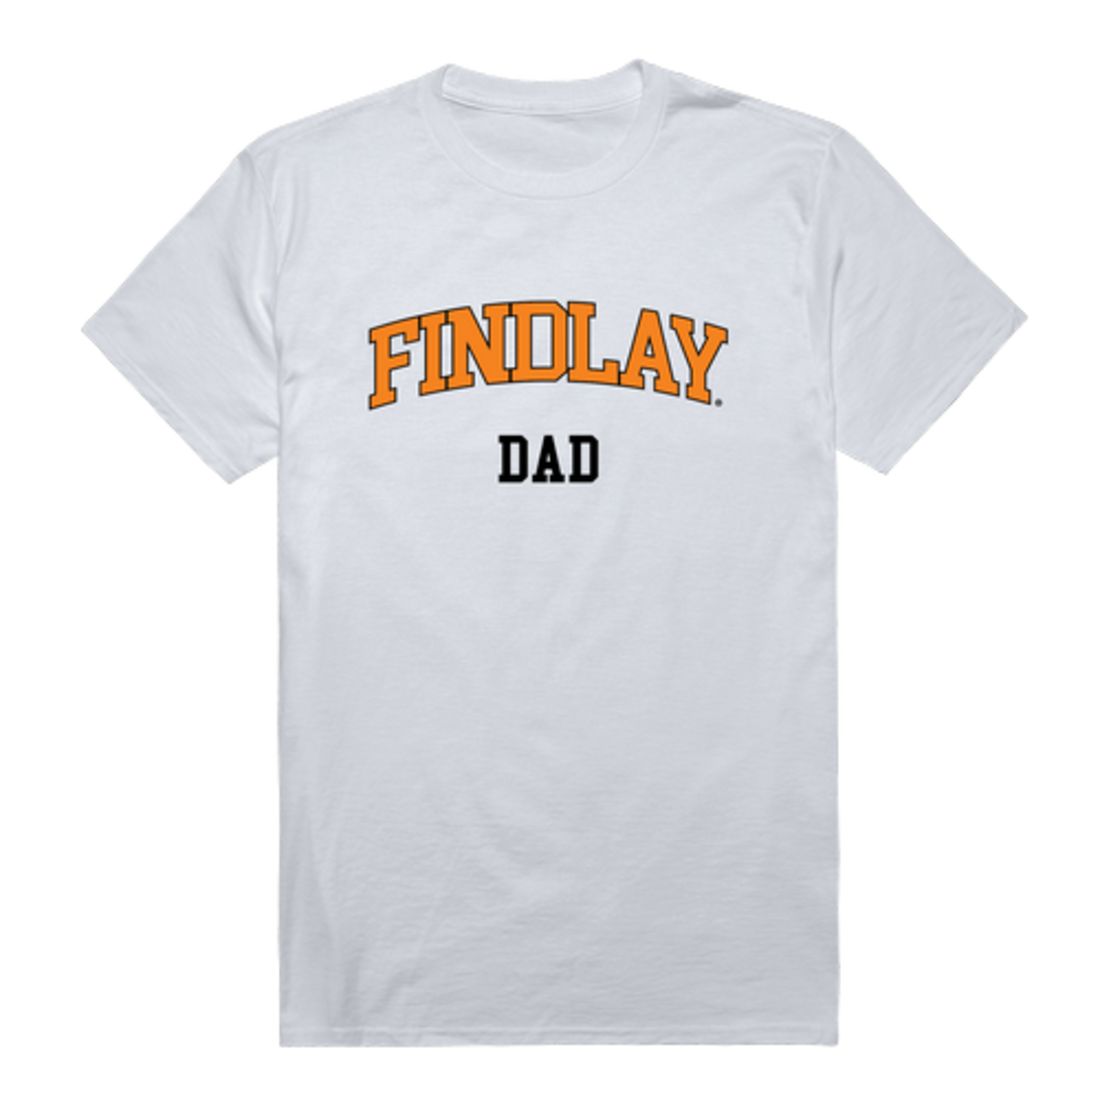 The University of Findlay Oilers Dad T-Shirt